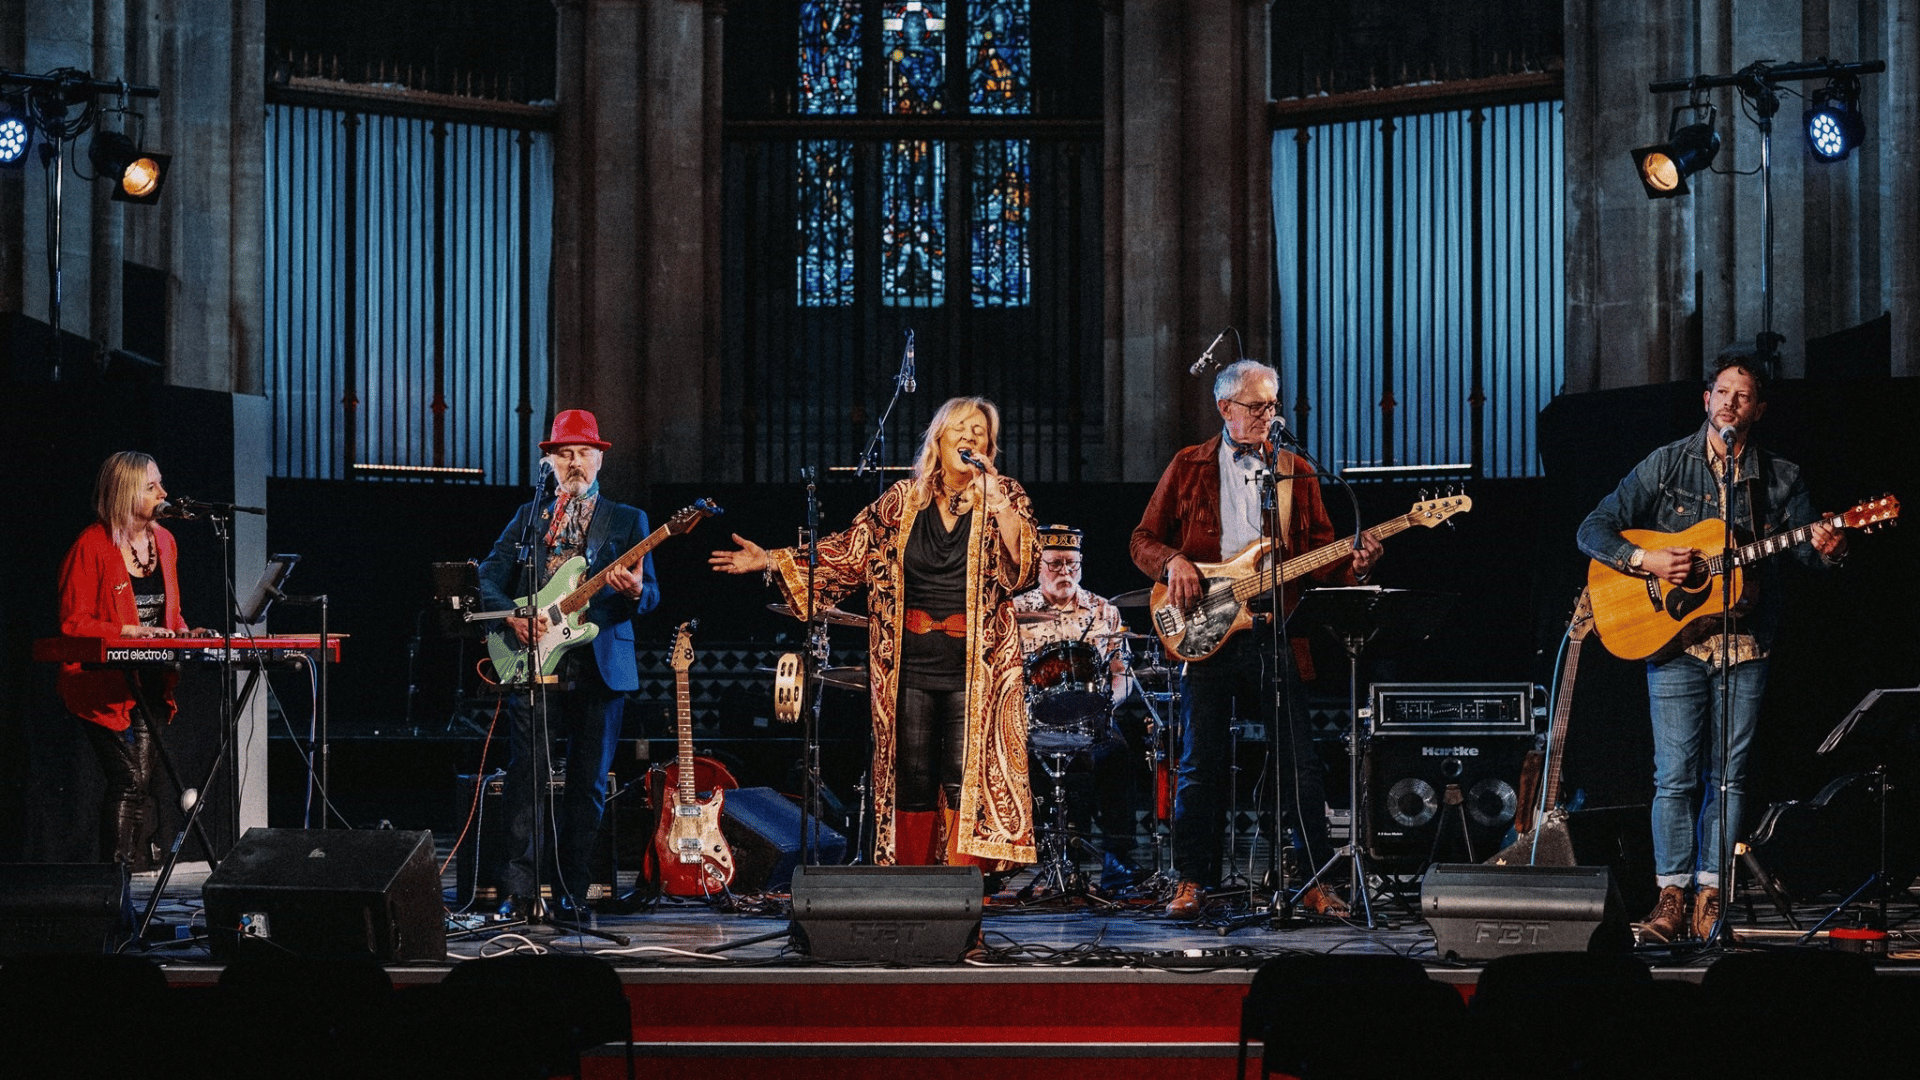 The Julie July band performing on stage